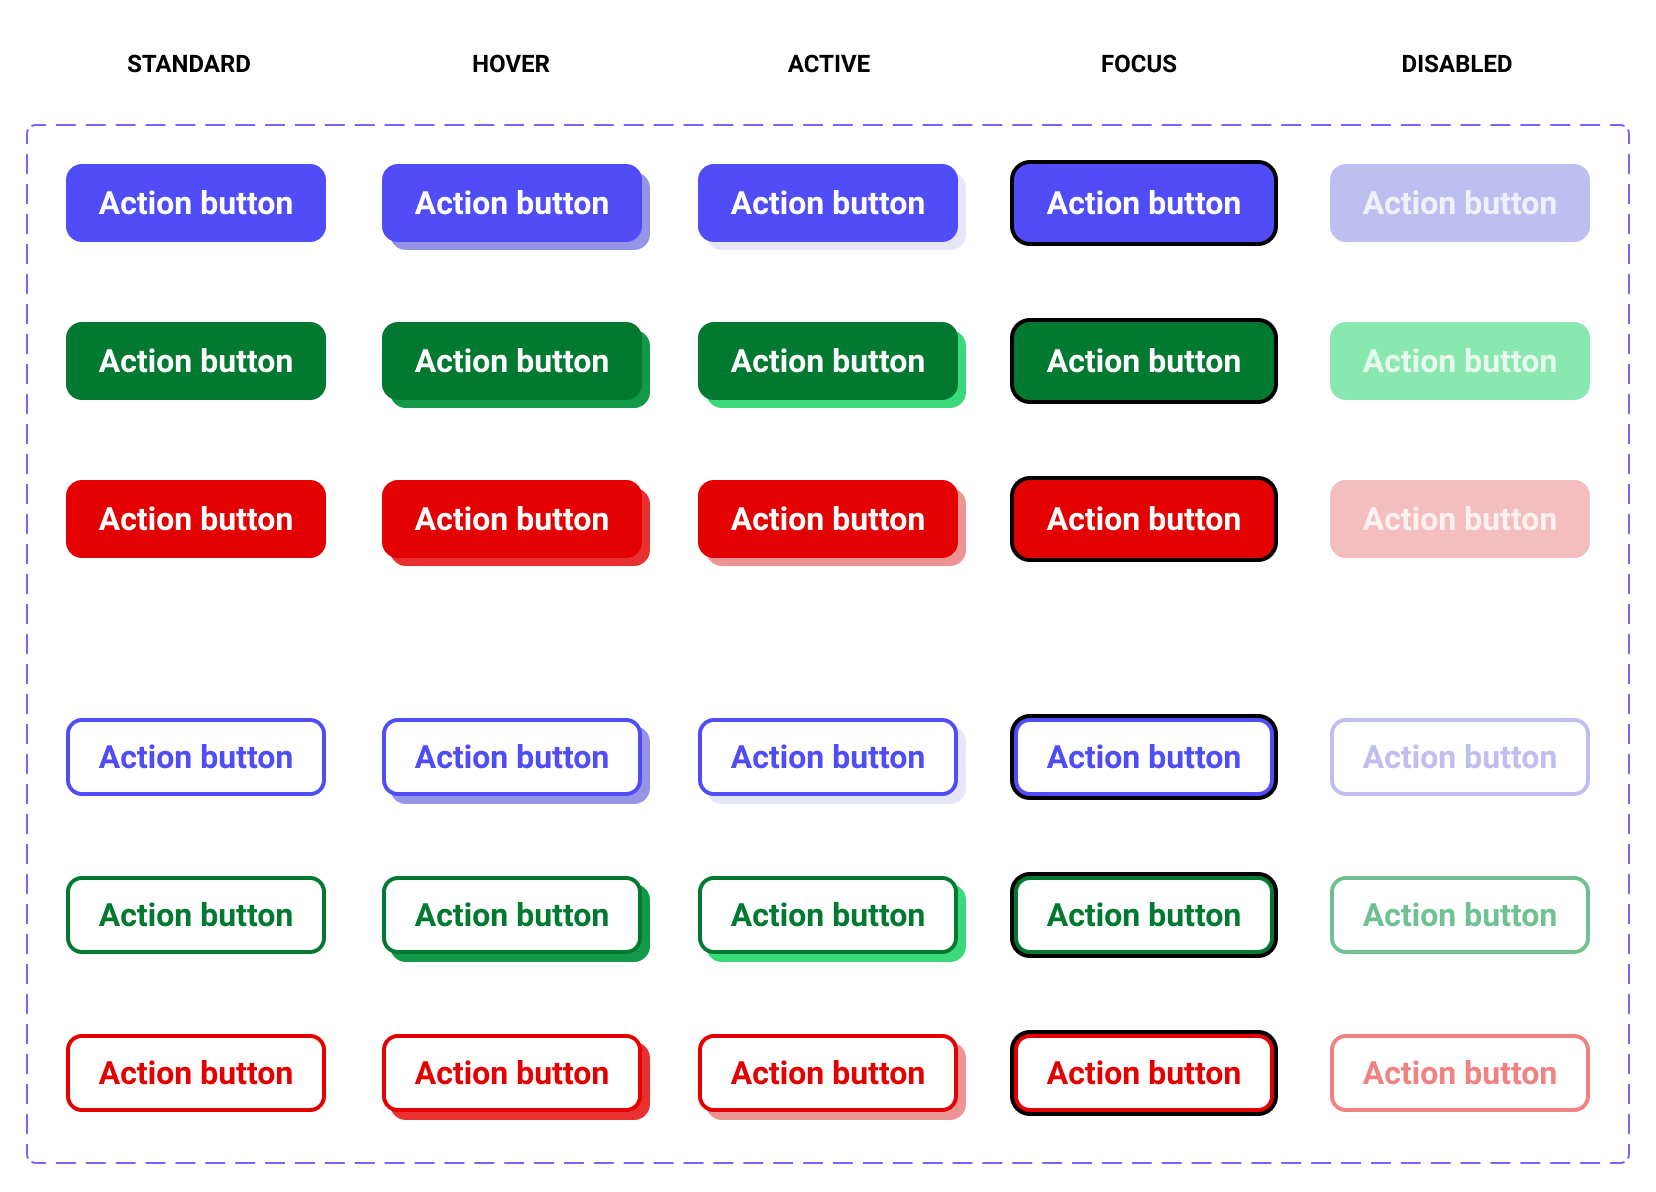 Three lines of buttons, each line representing a level of hierarchy and each column a visual state for the button